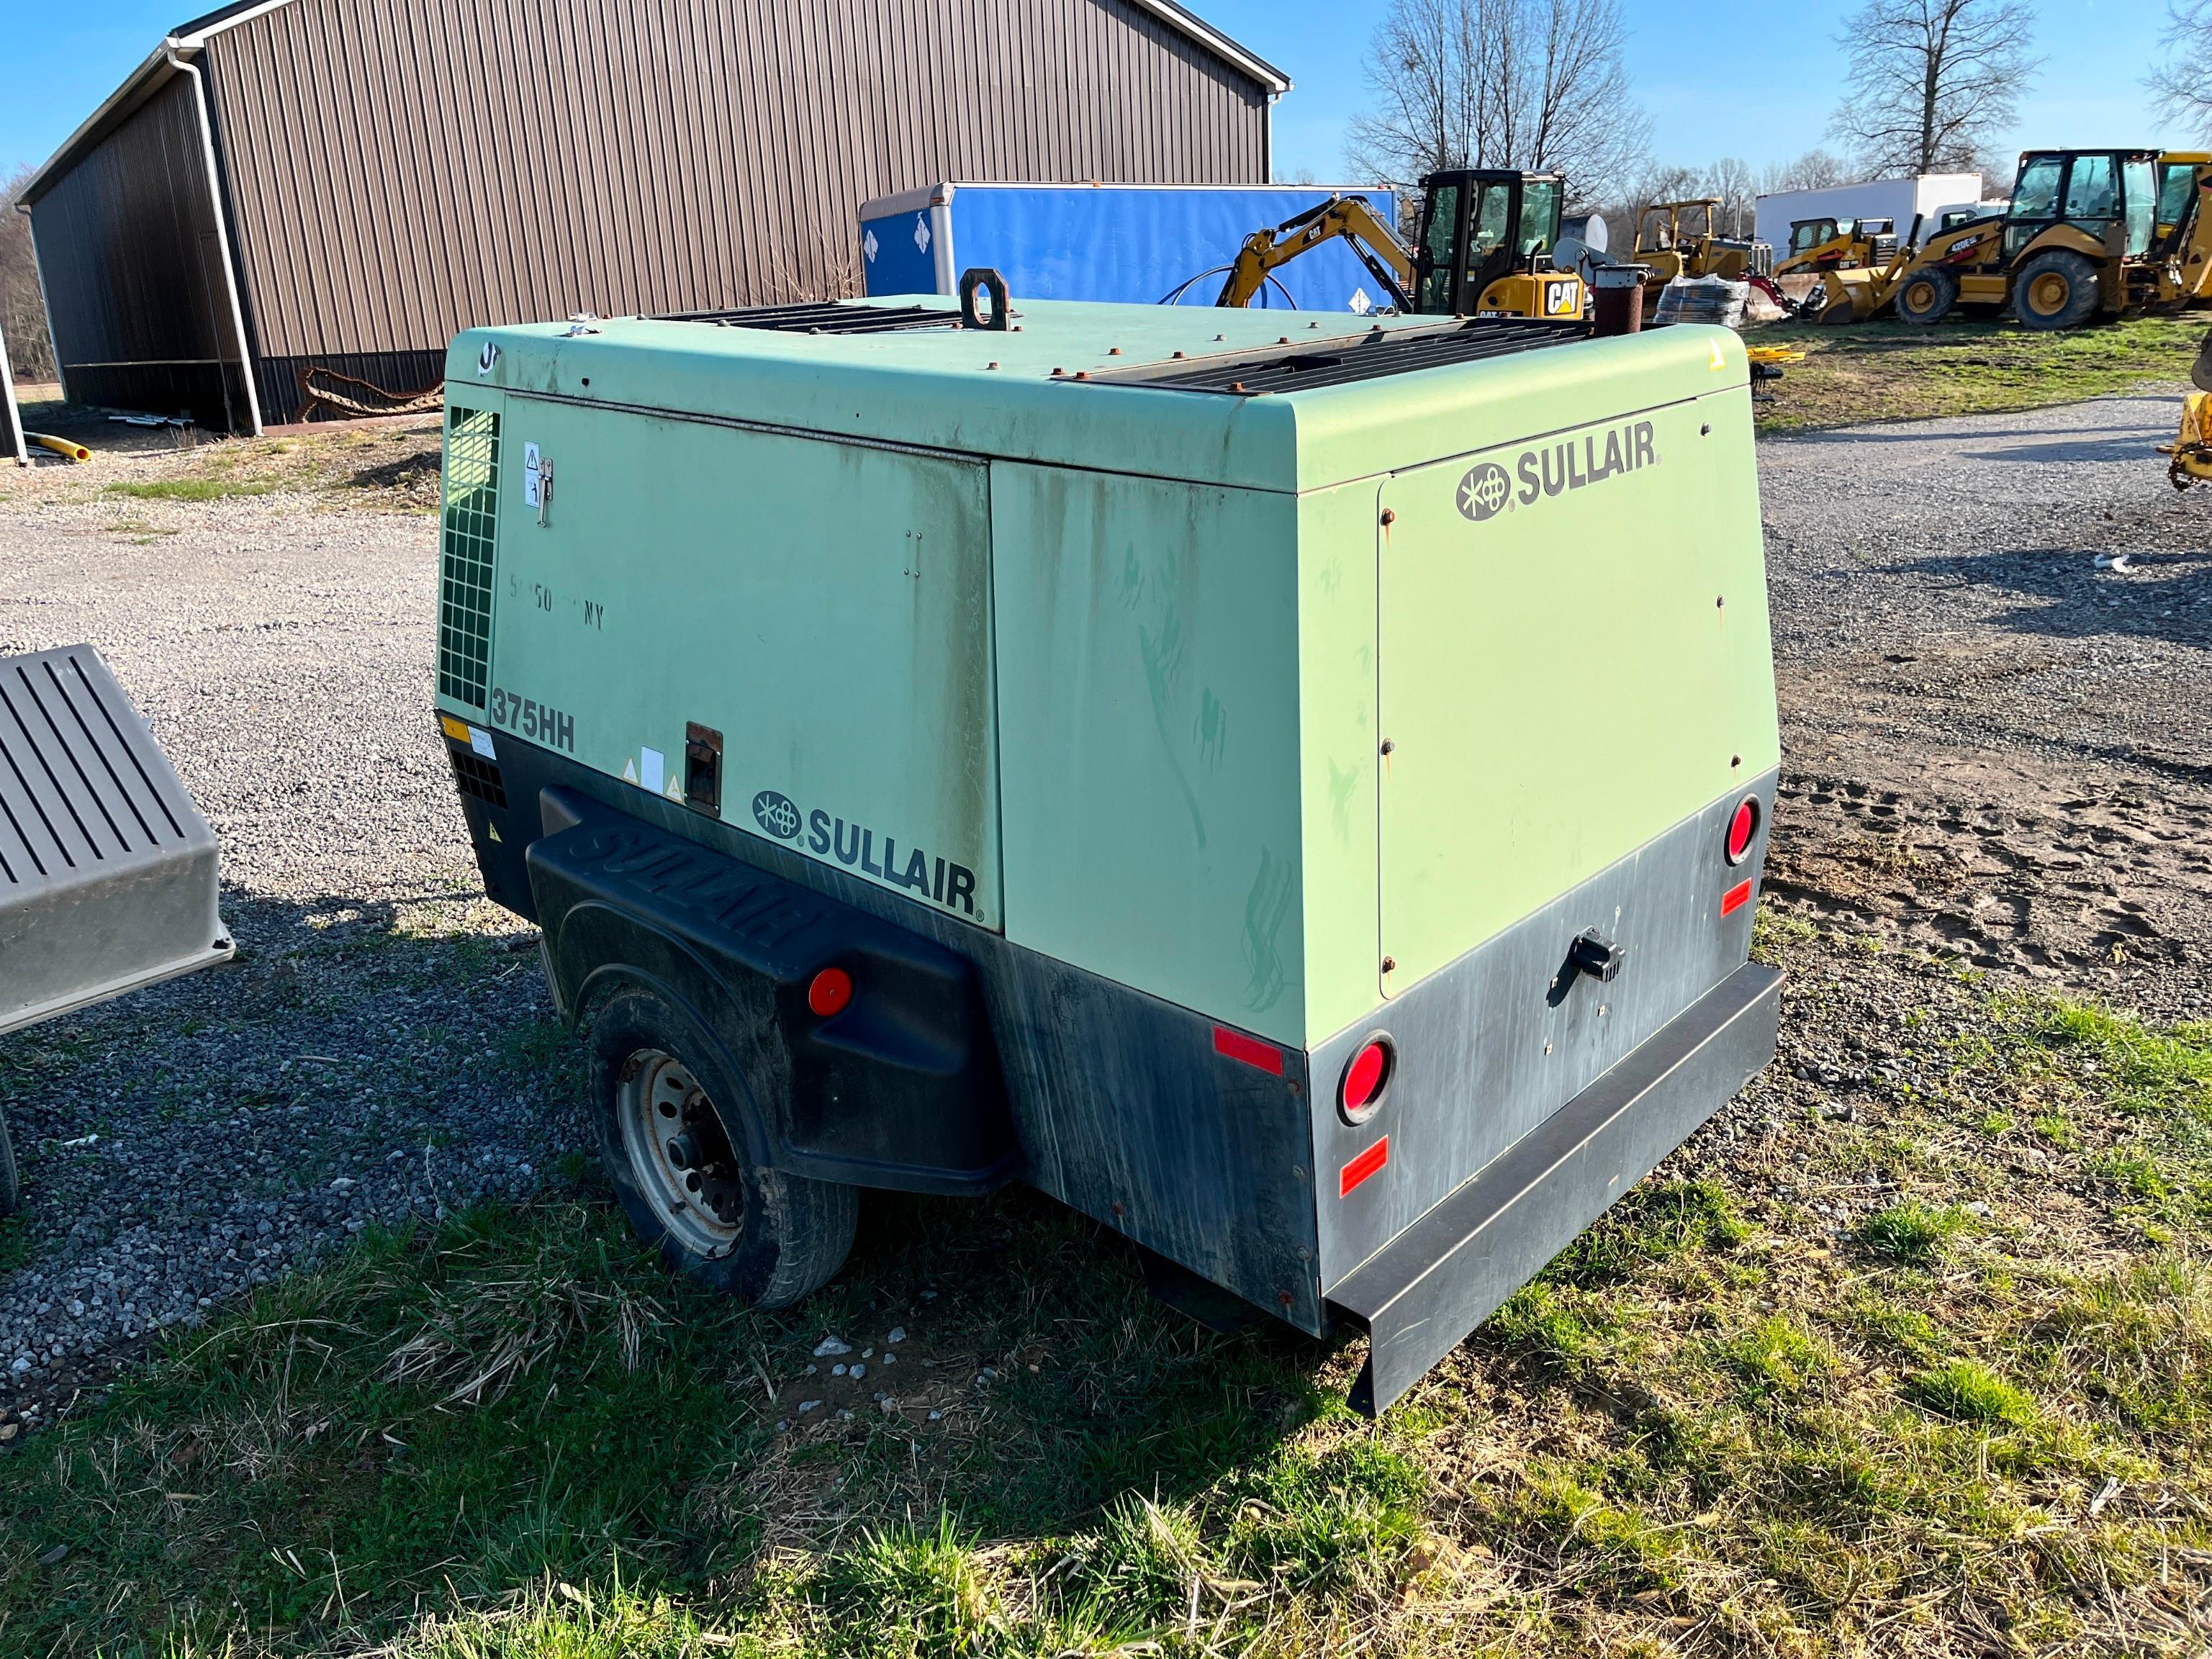 2011 SULLAIR 375HH AIR COMPRESSOR SN:201106240045 powered by John Deere diesel engine, equipped with